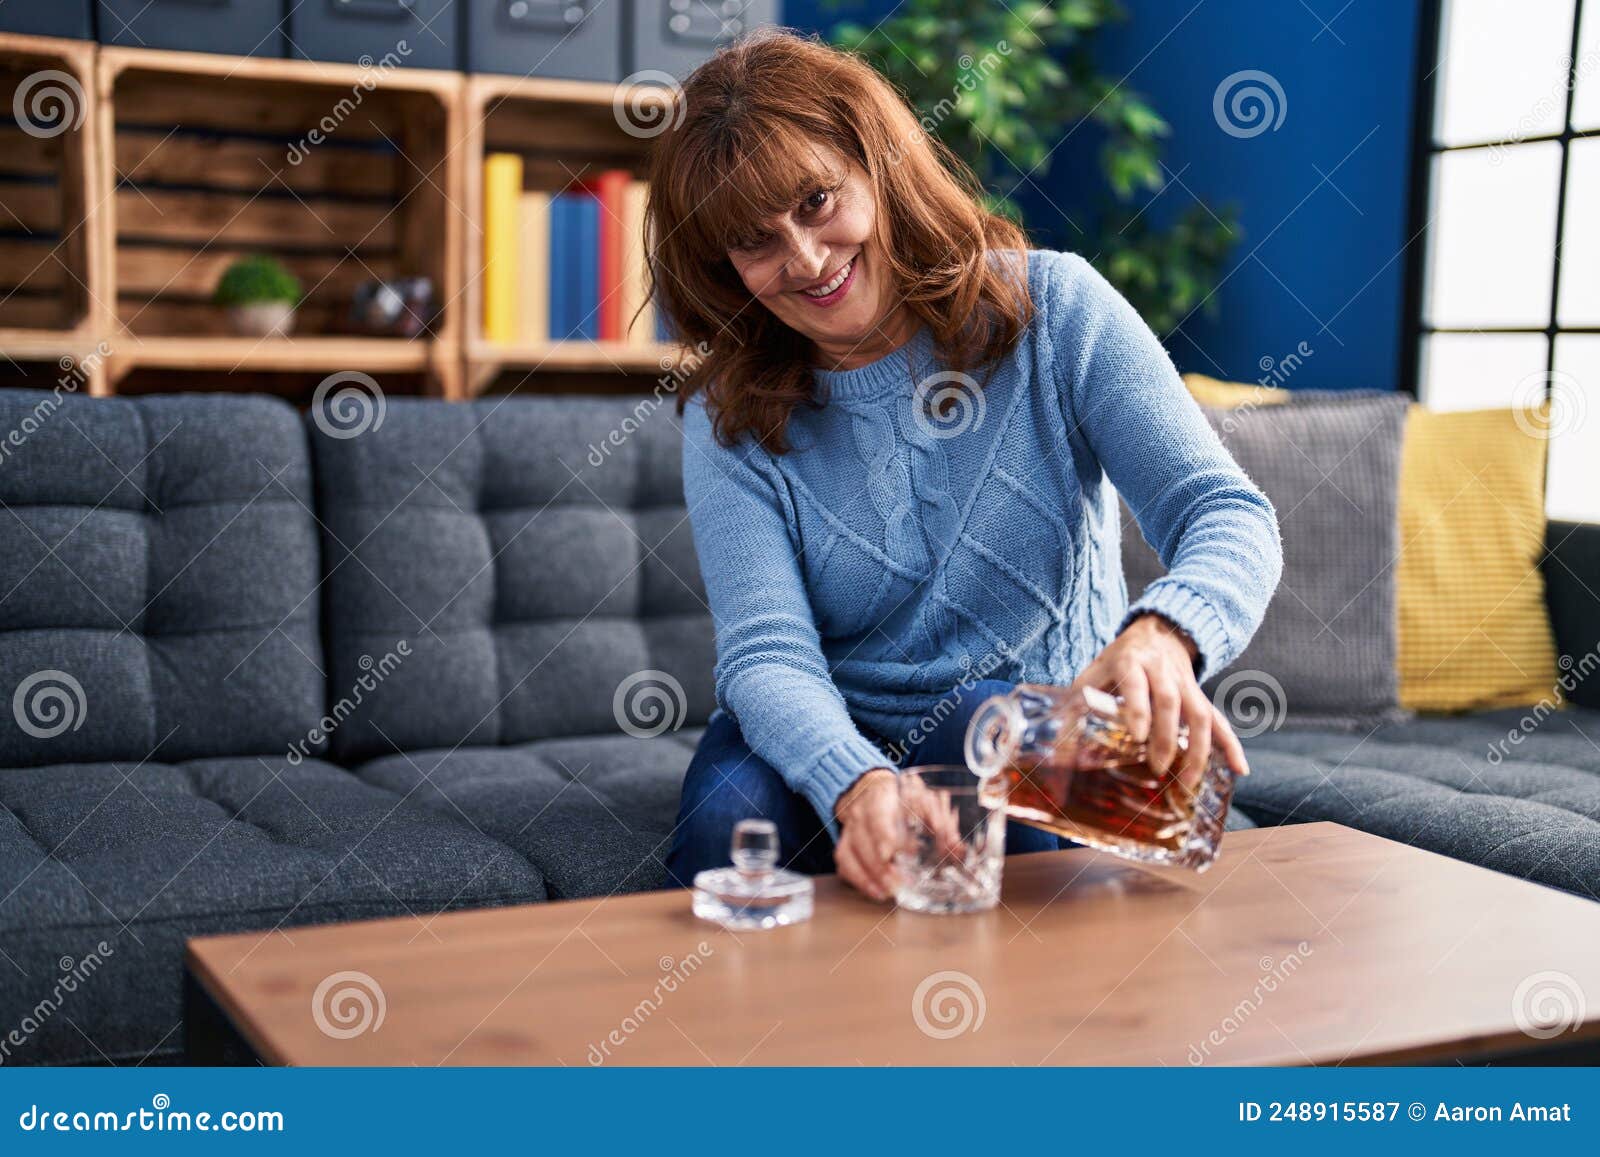 middle age woman pouring licor on glass sitting on sofa at home